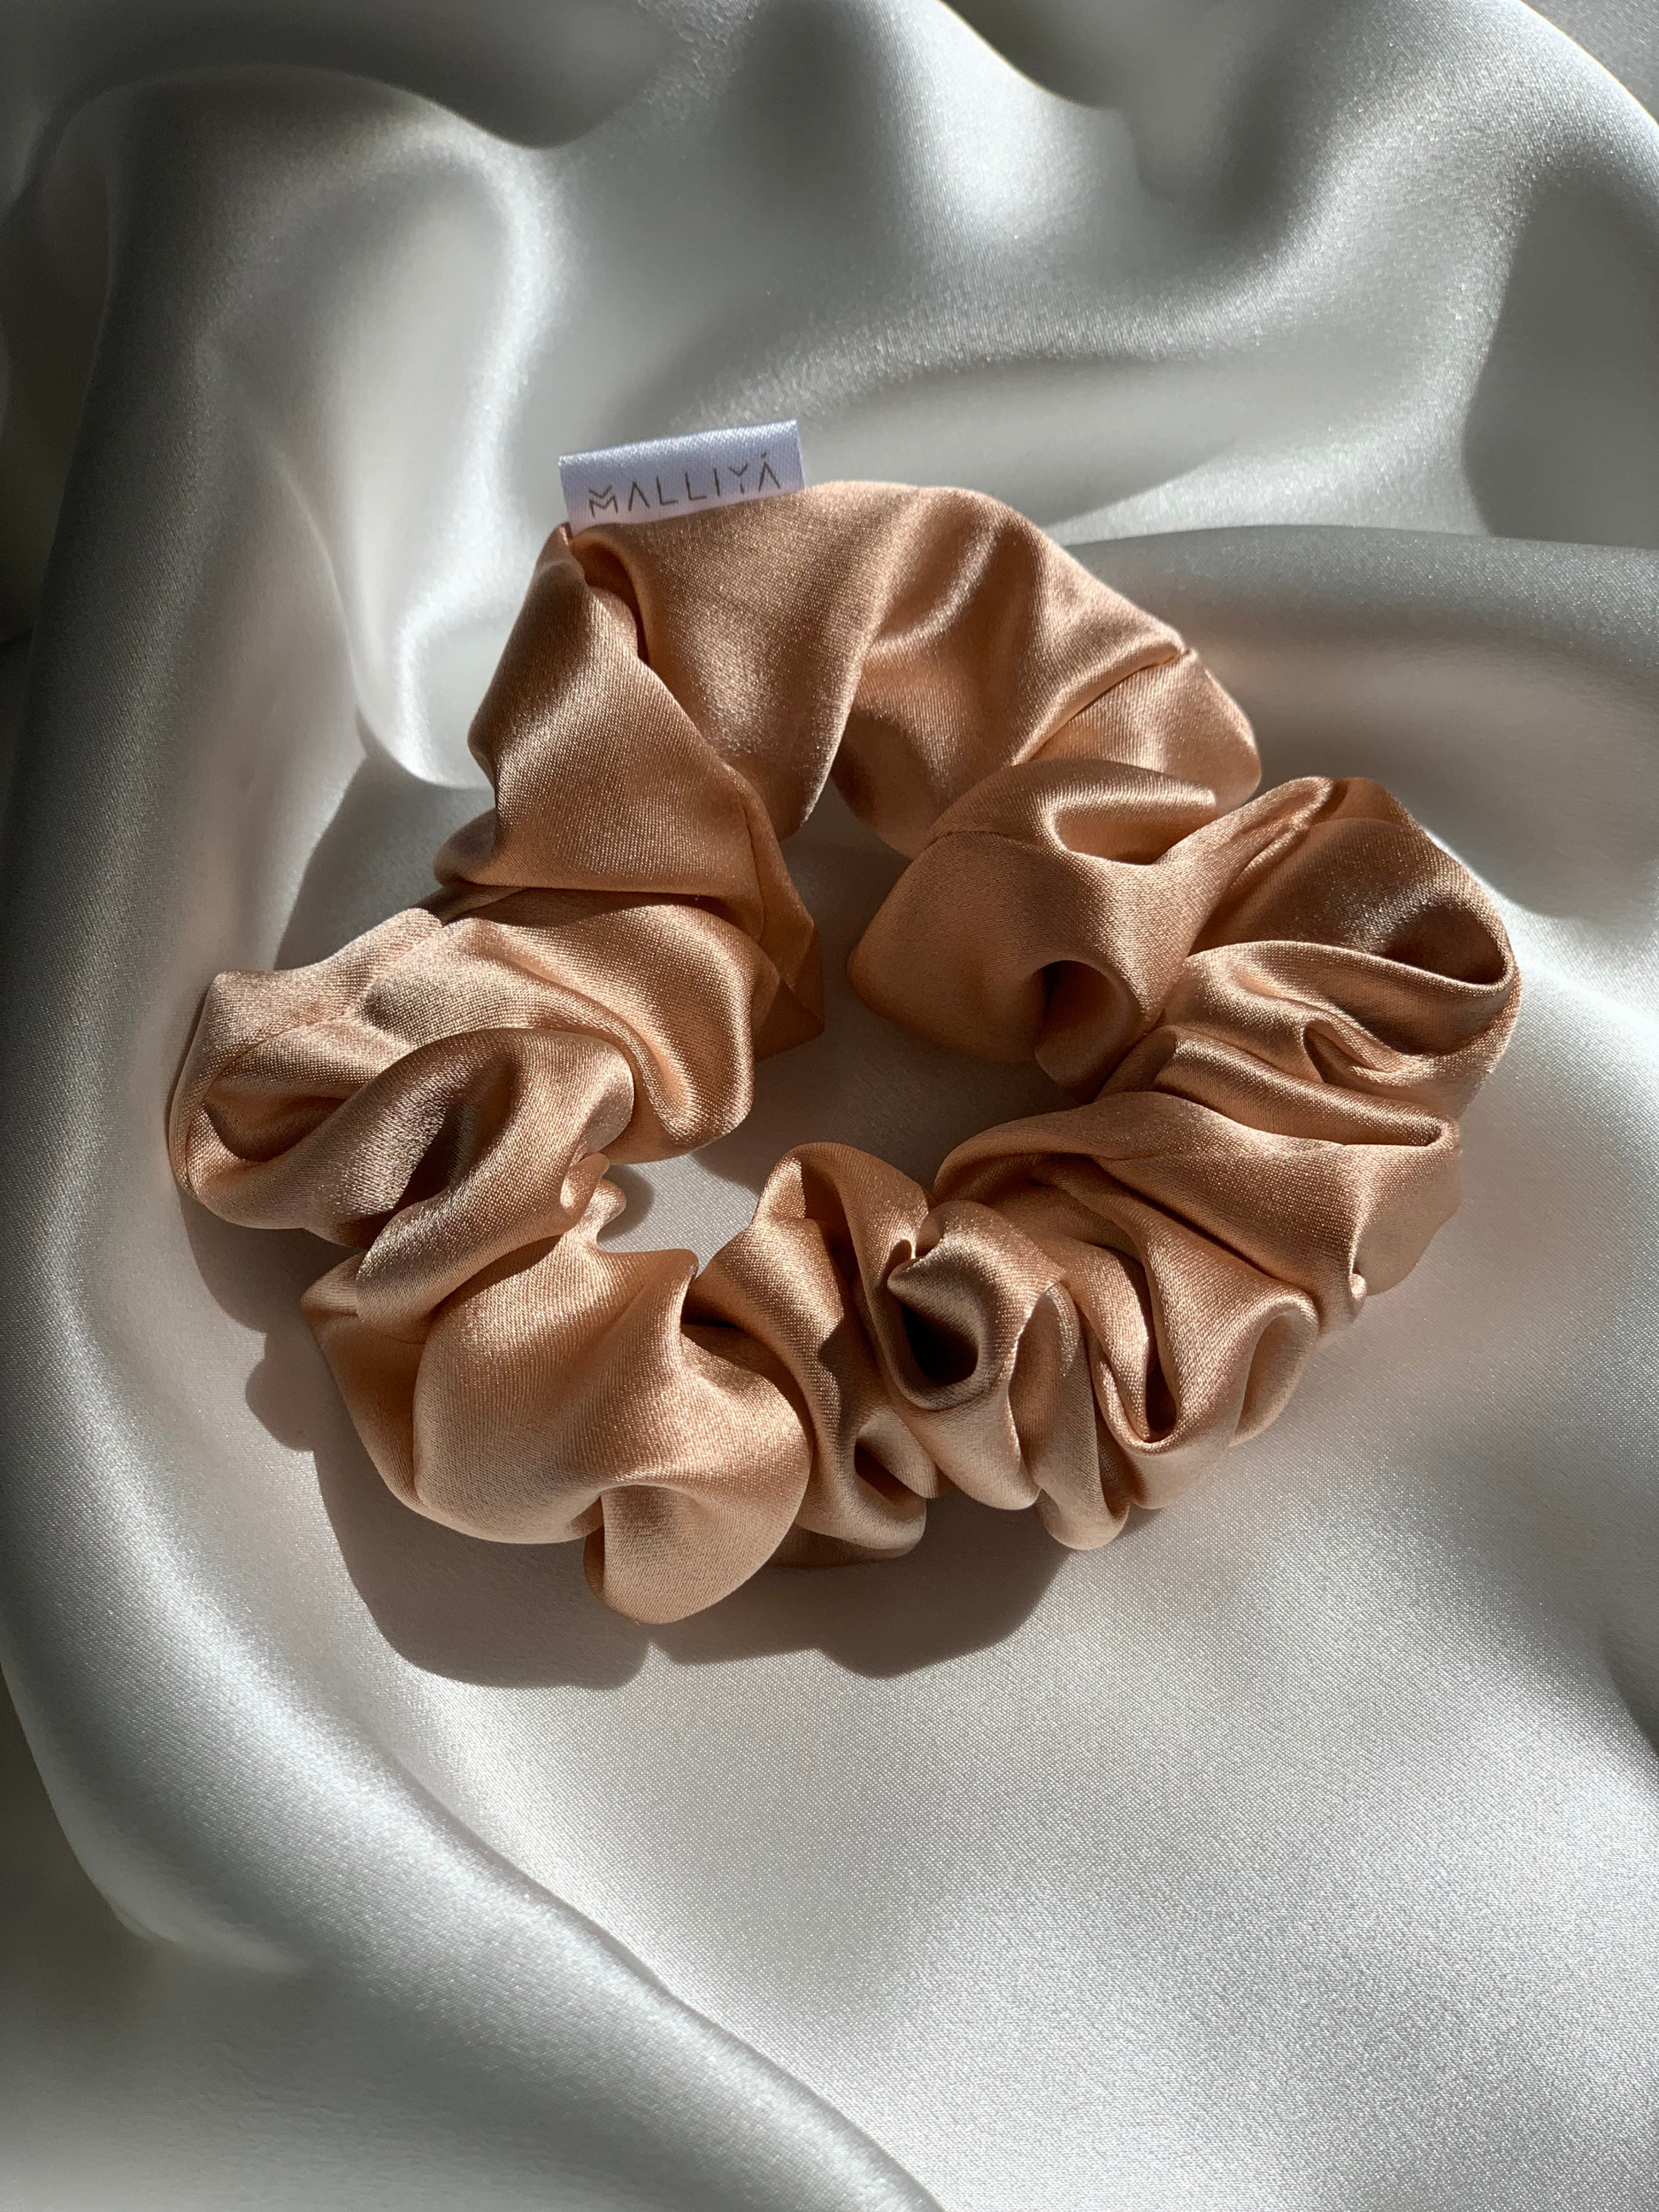 Silk Hair Ties with Crystals: Rose Gold and Lavender